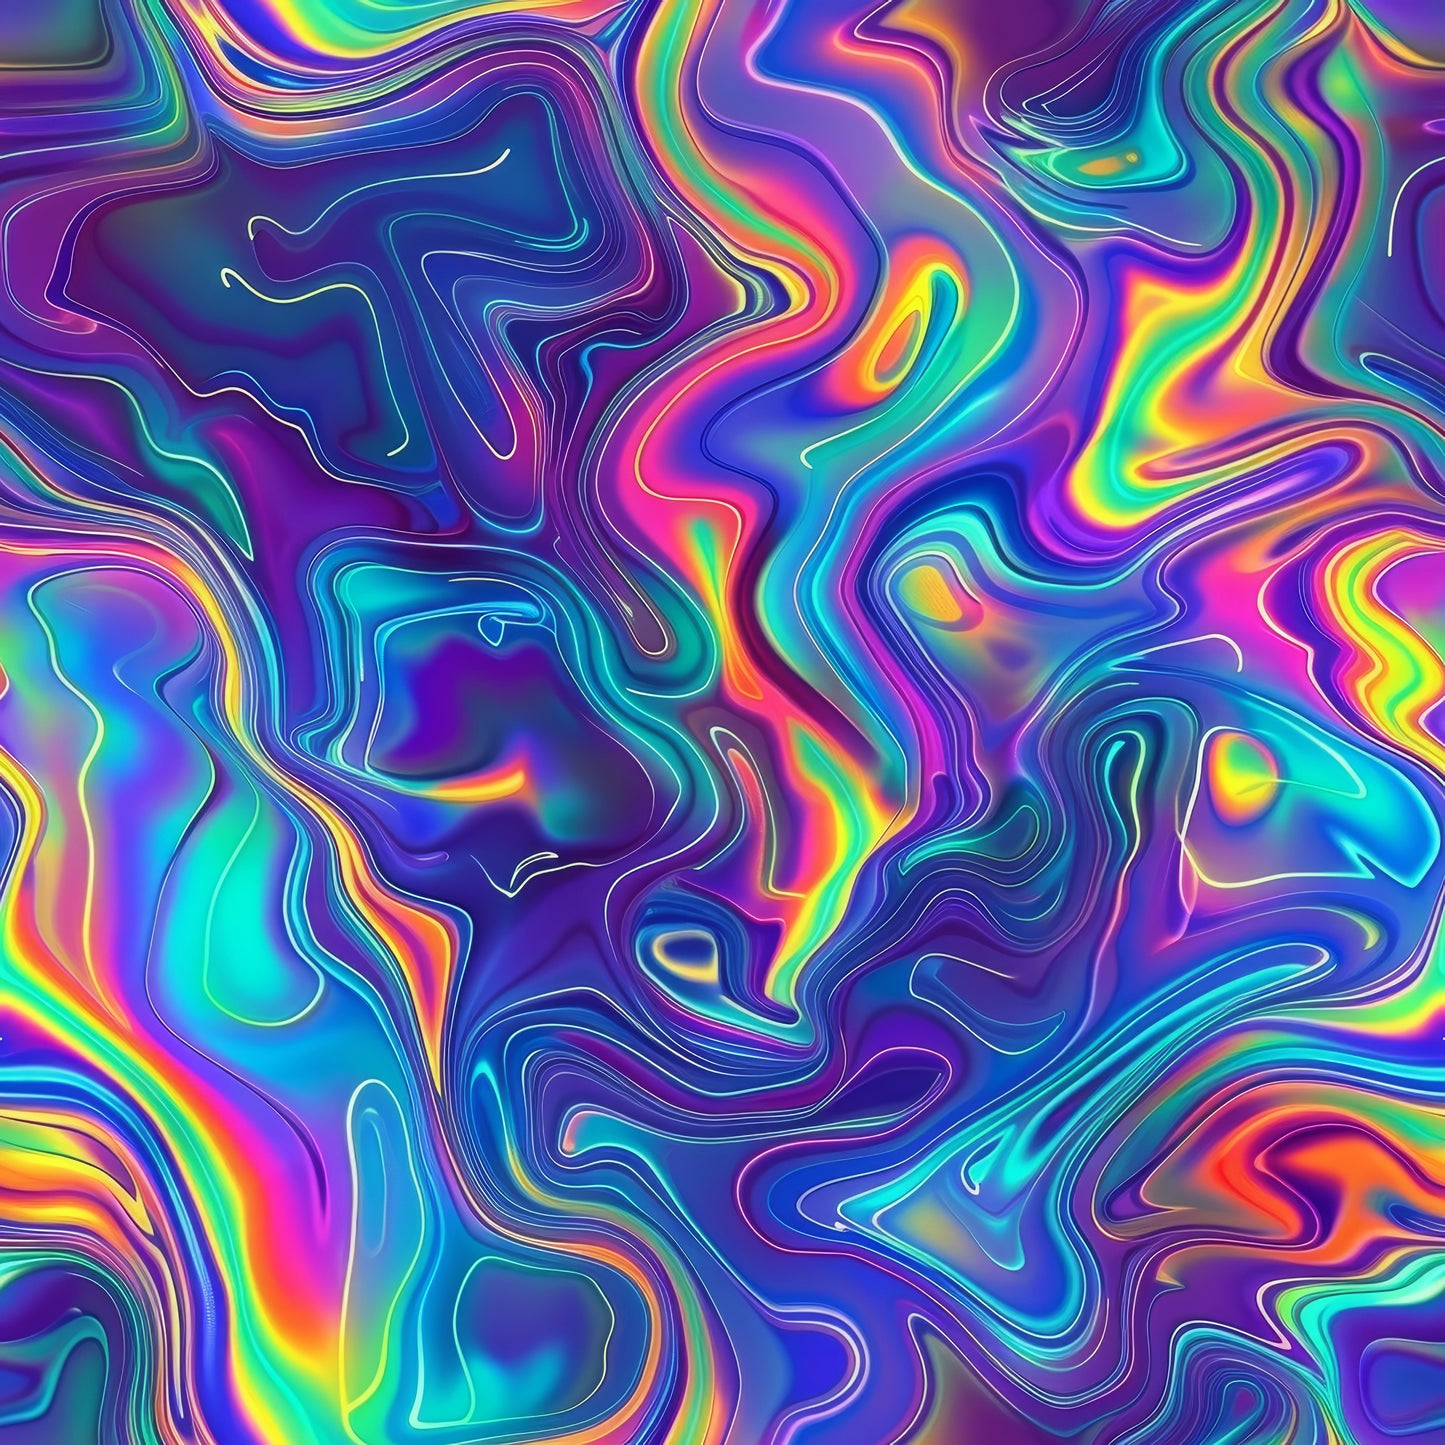 HOLO PSYCHEDELIC PATTERN VINYL - MULTIPLE VARIATIONS